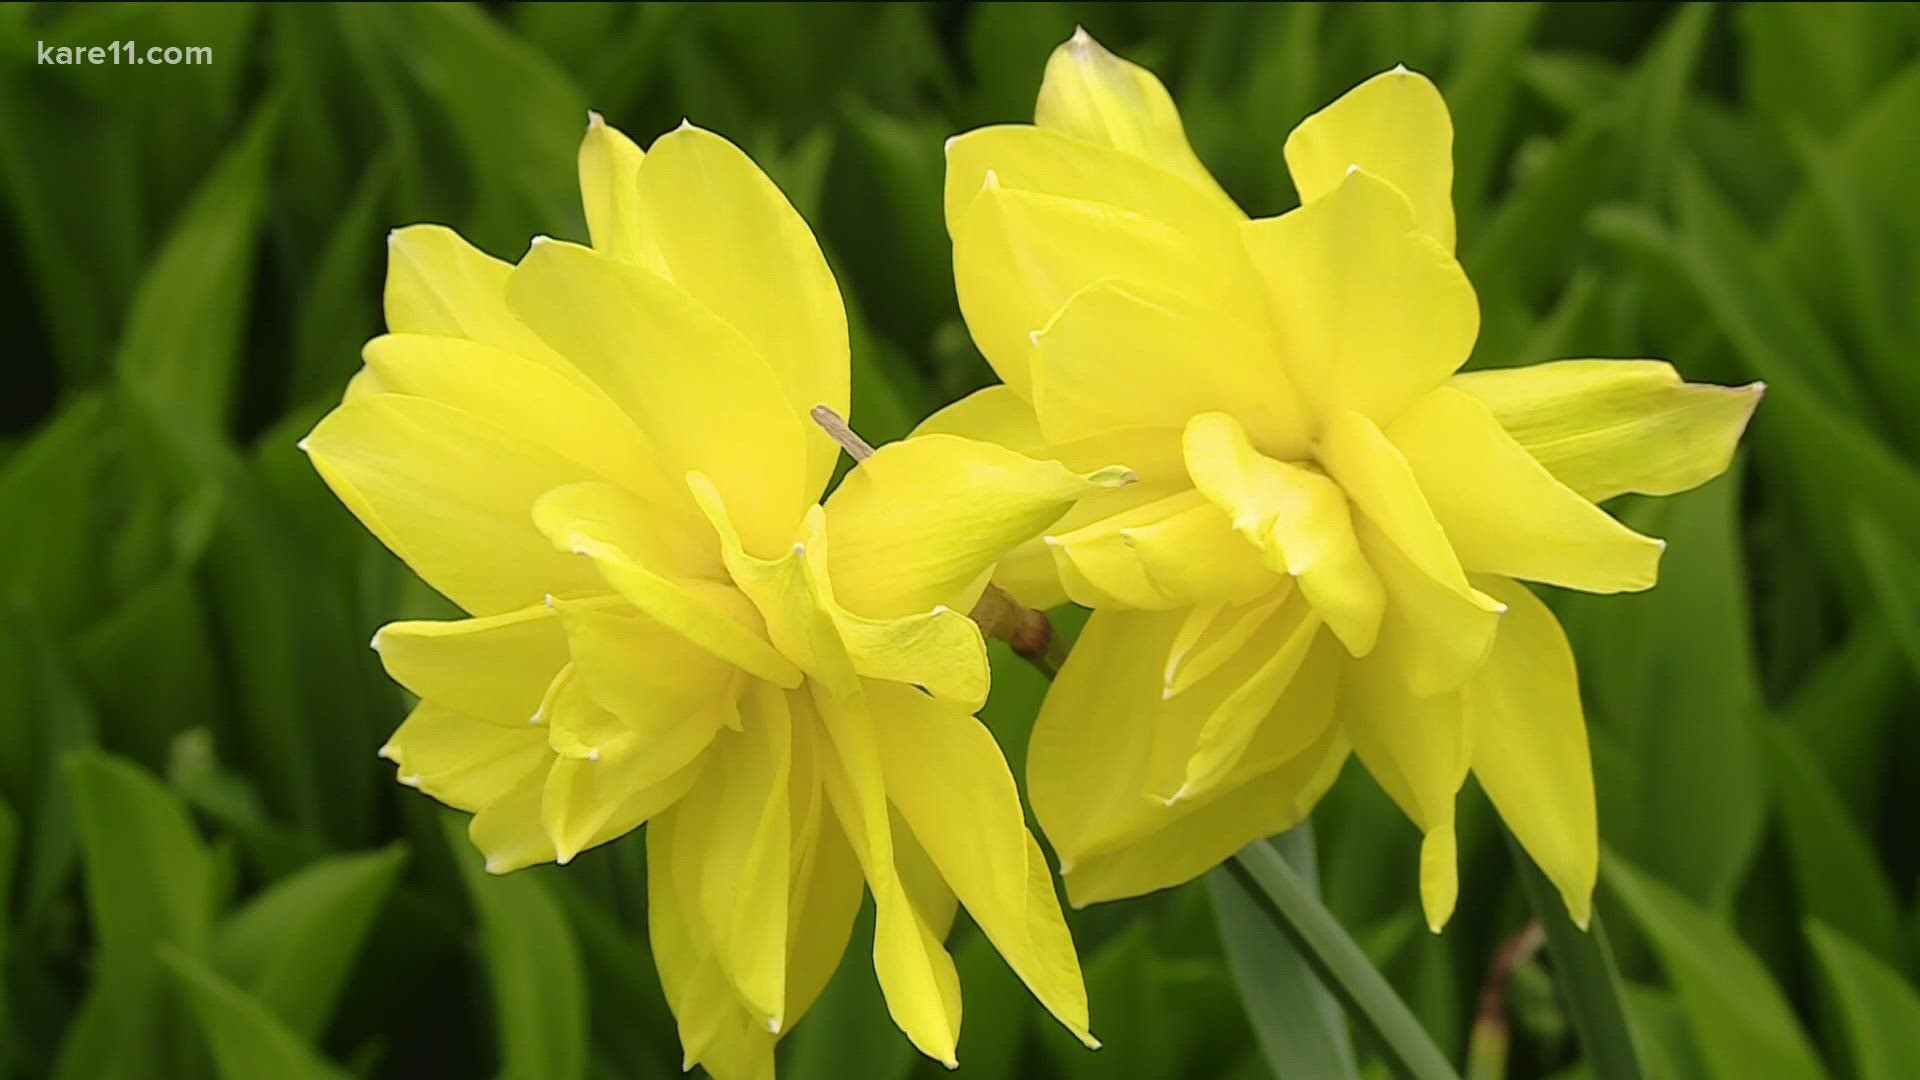 It’s time now to plant spring bulbs. And while tulips are beautiful, we think daffodils are an even more fantastic choice for a few reasons.